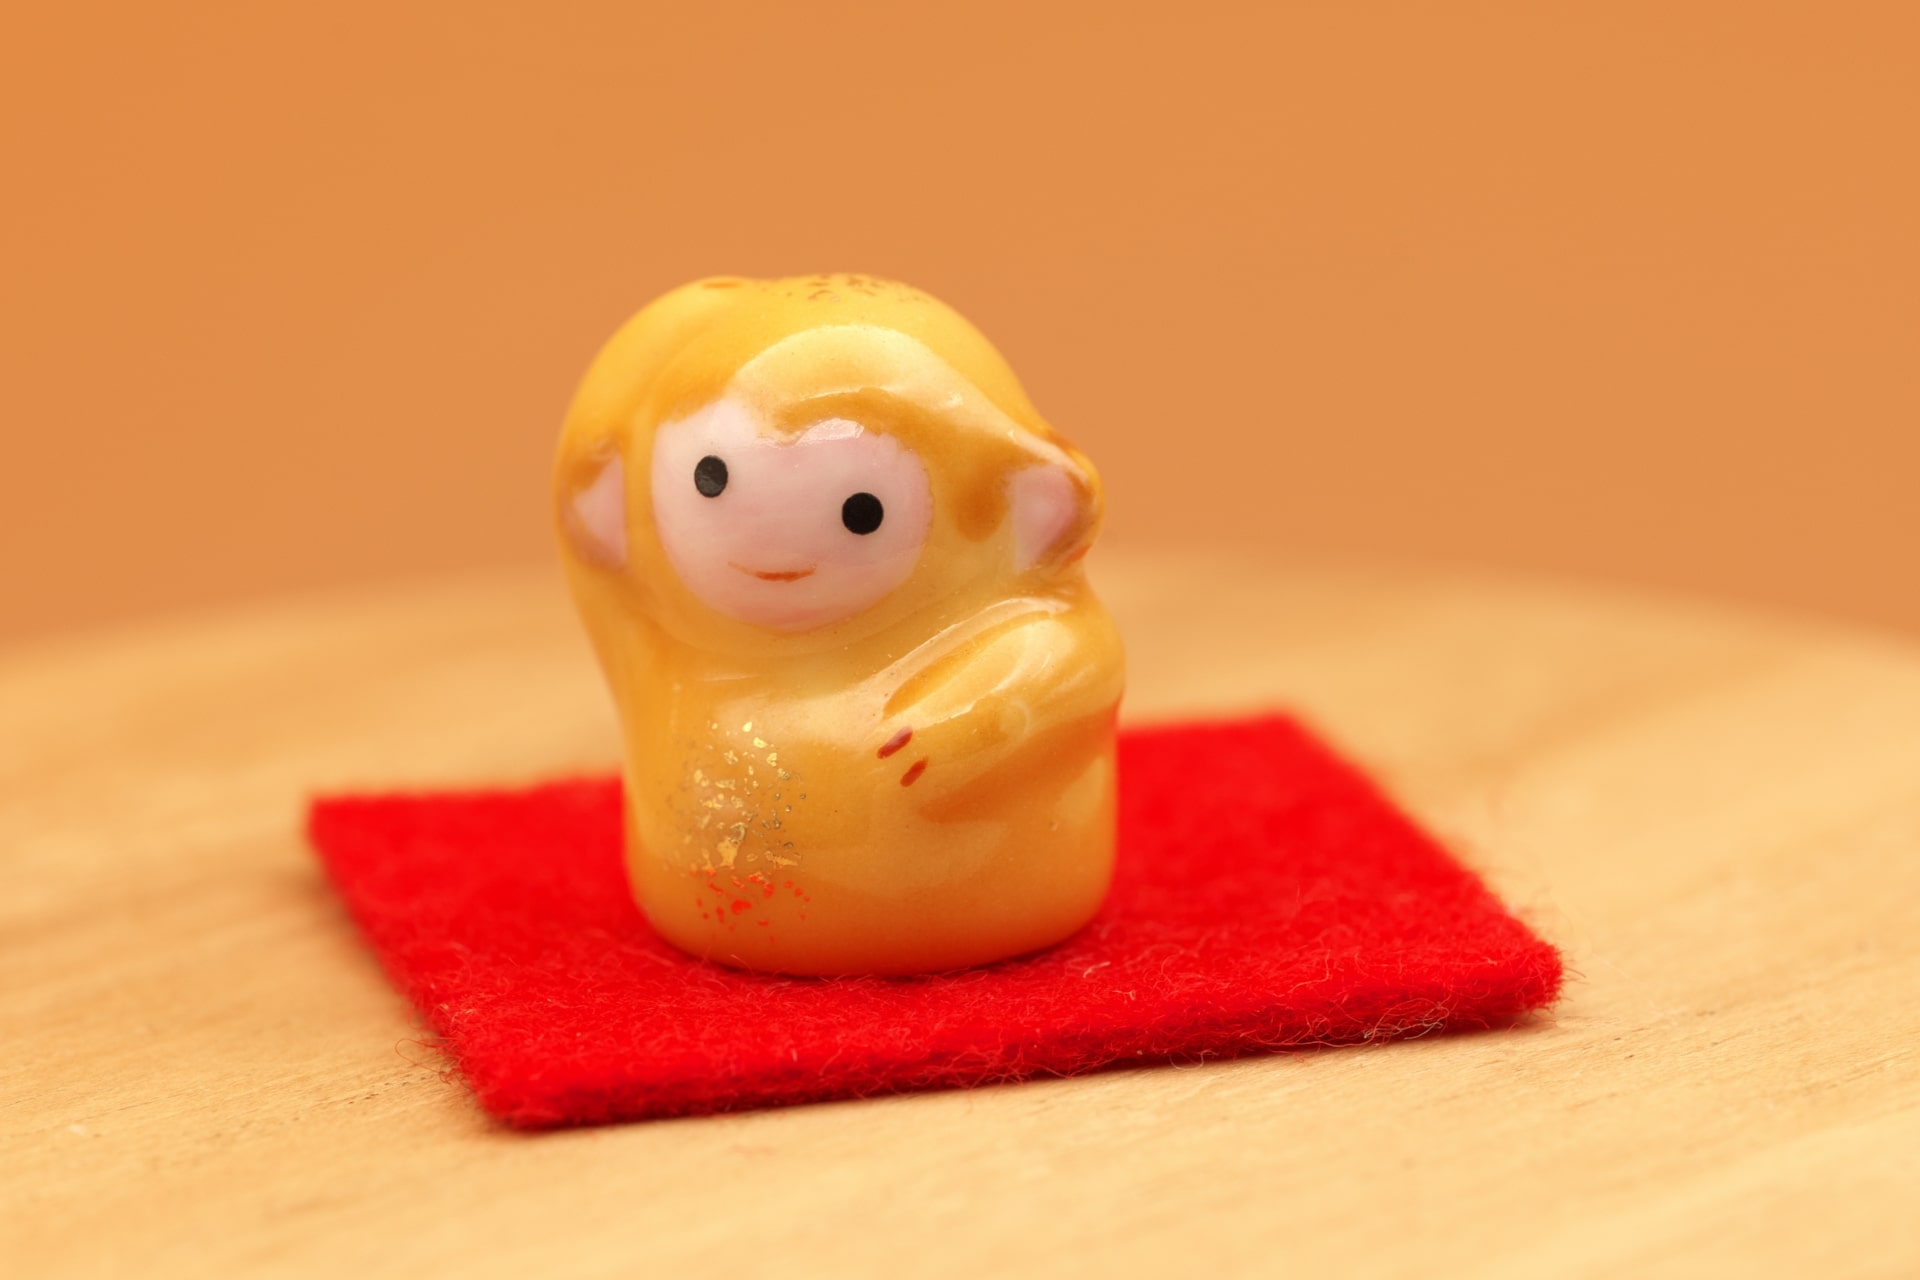 Small figurine depicting the monkey from Chinese Zodiac